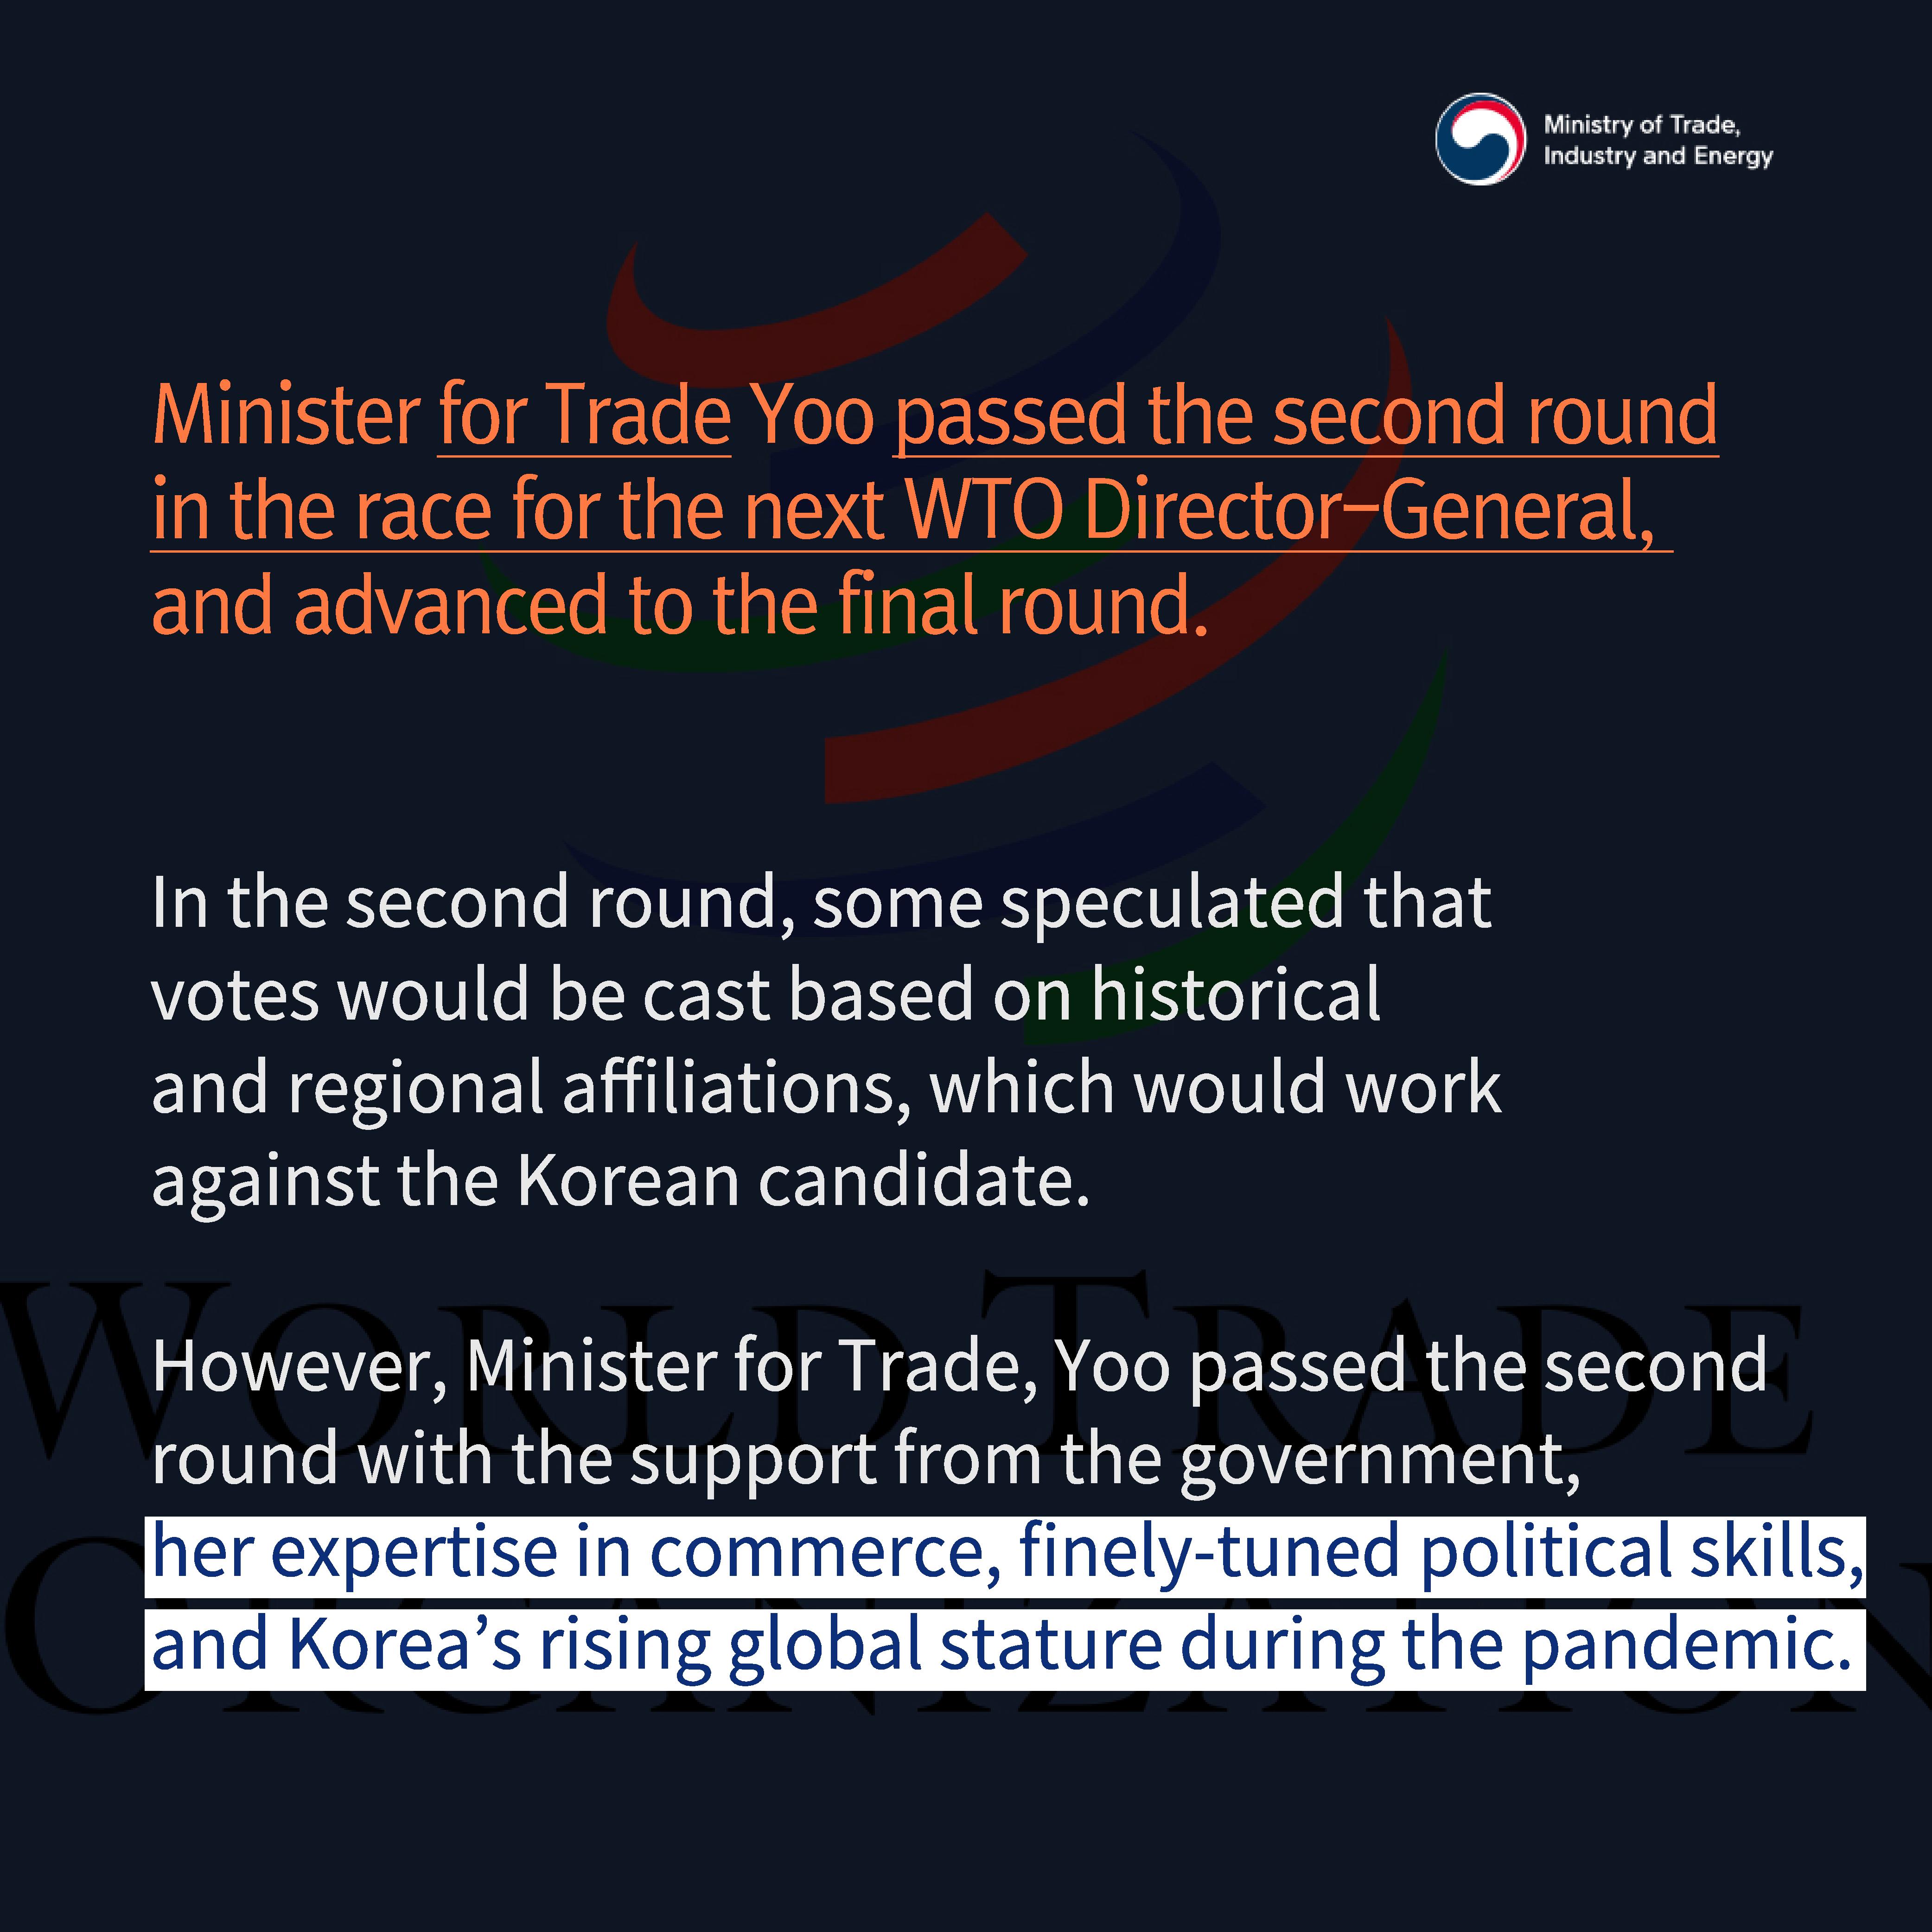 Trade Minister Yoo Myung-hee advances to the final round in the race for the next WTO DG Image 1